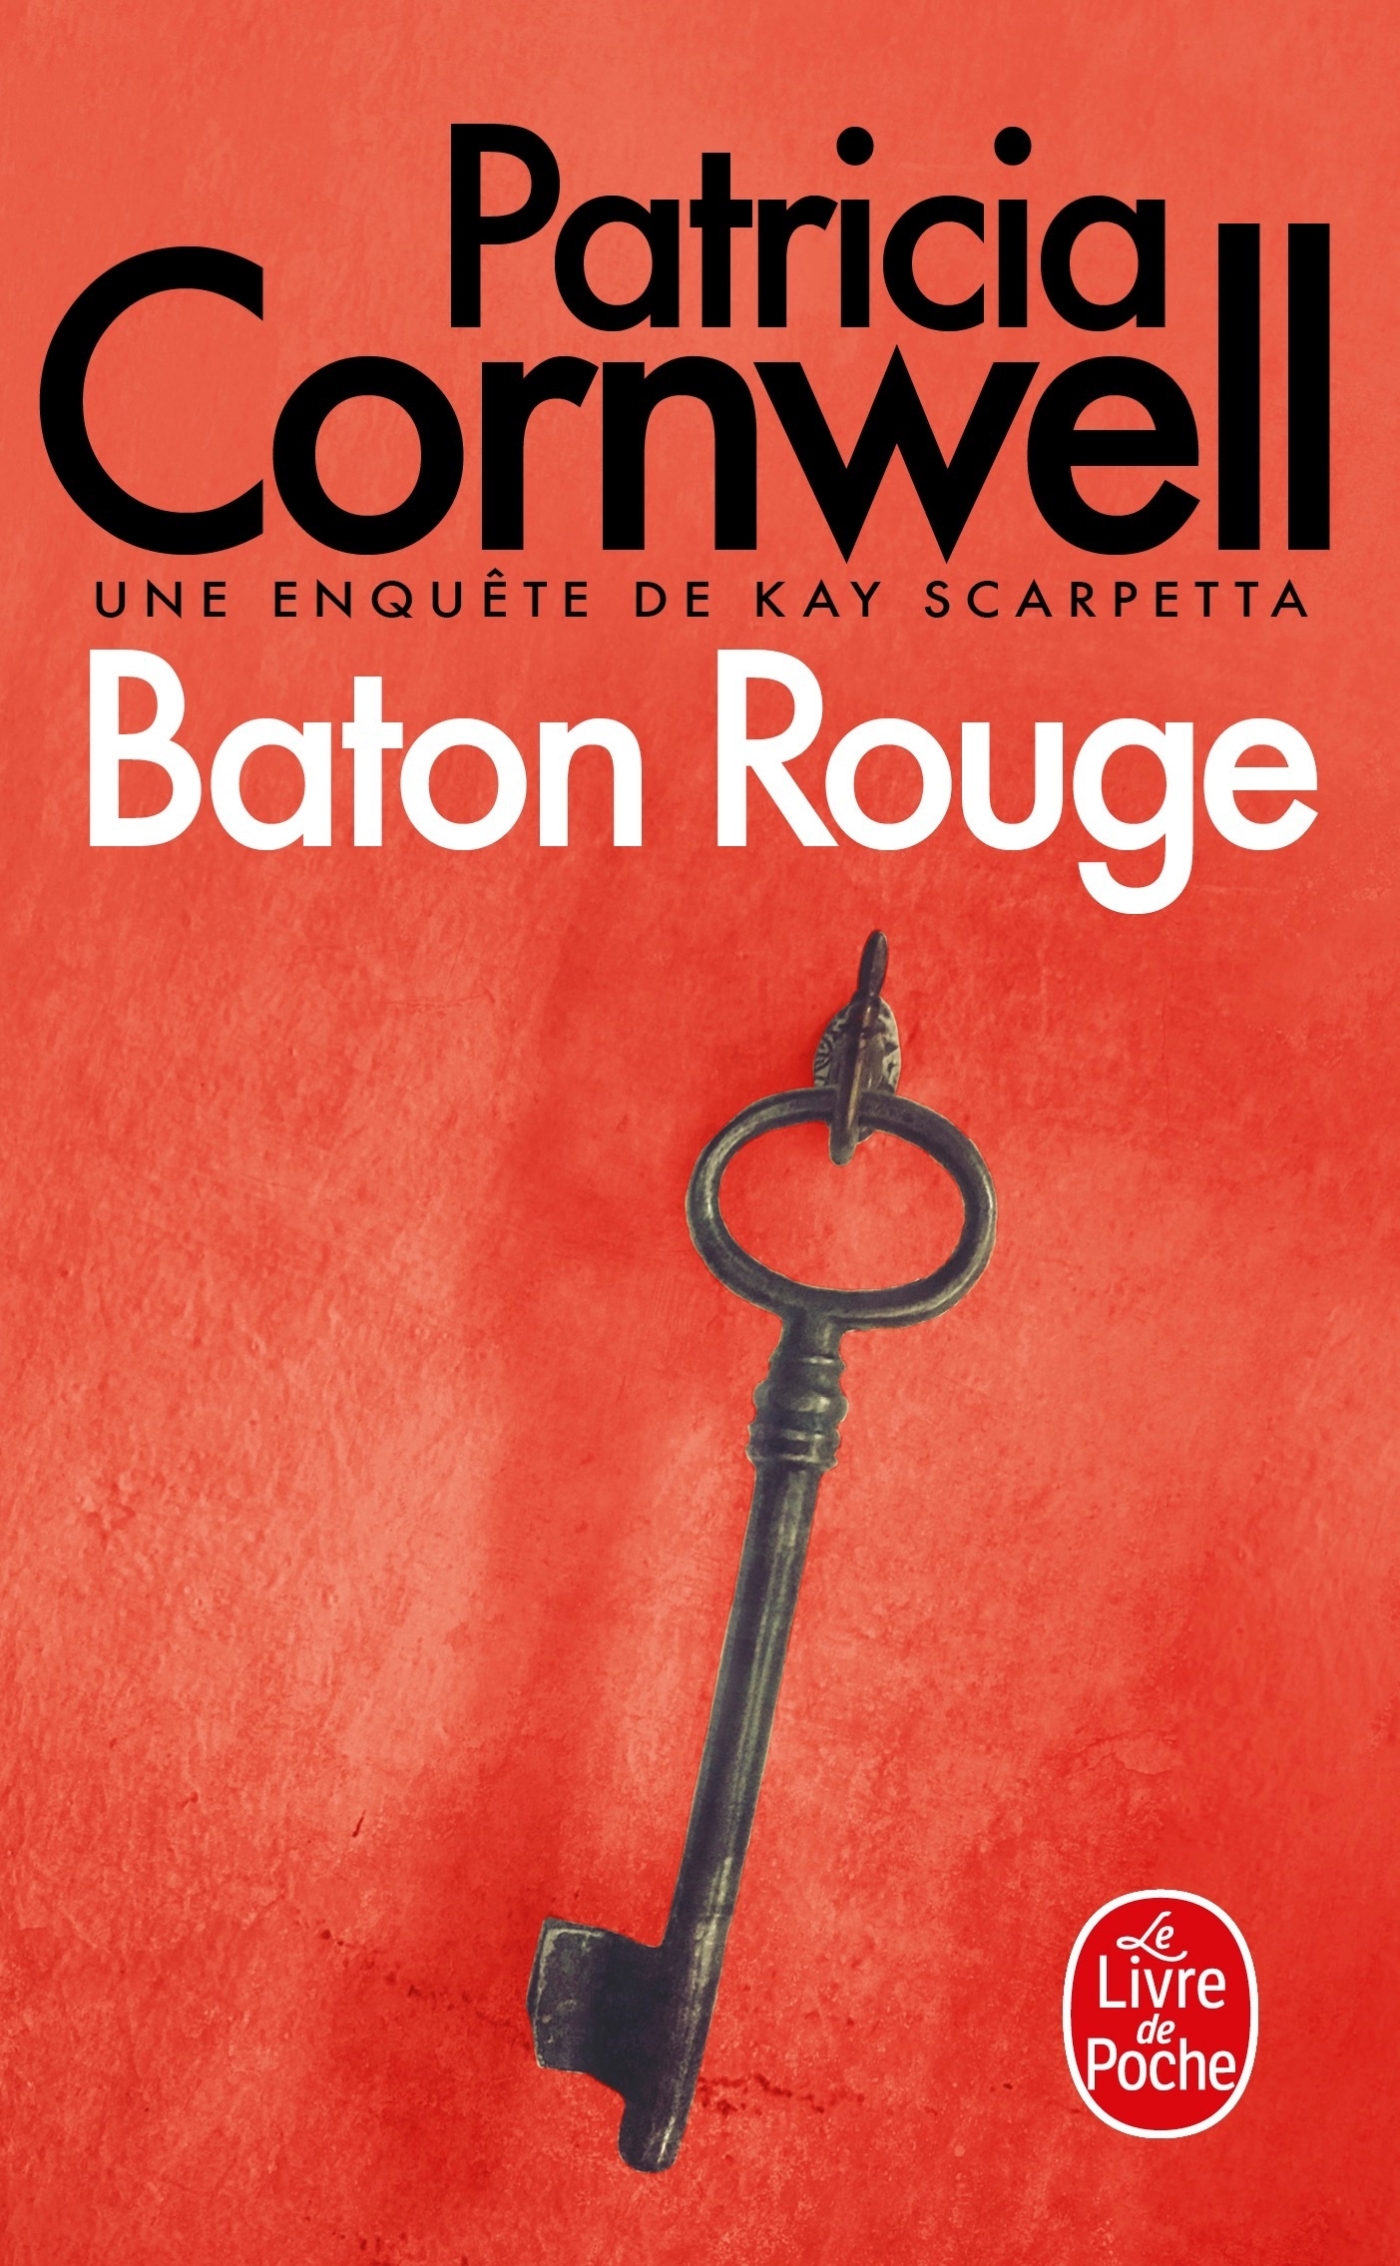 Baton Rouge (9782253111924-front-cover)